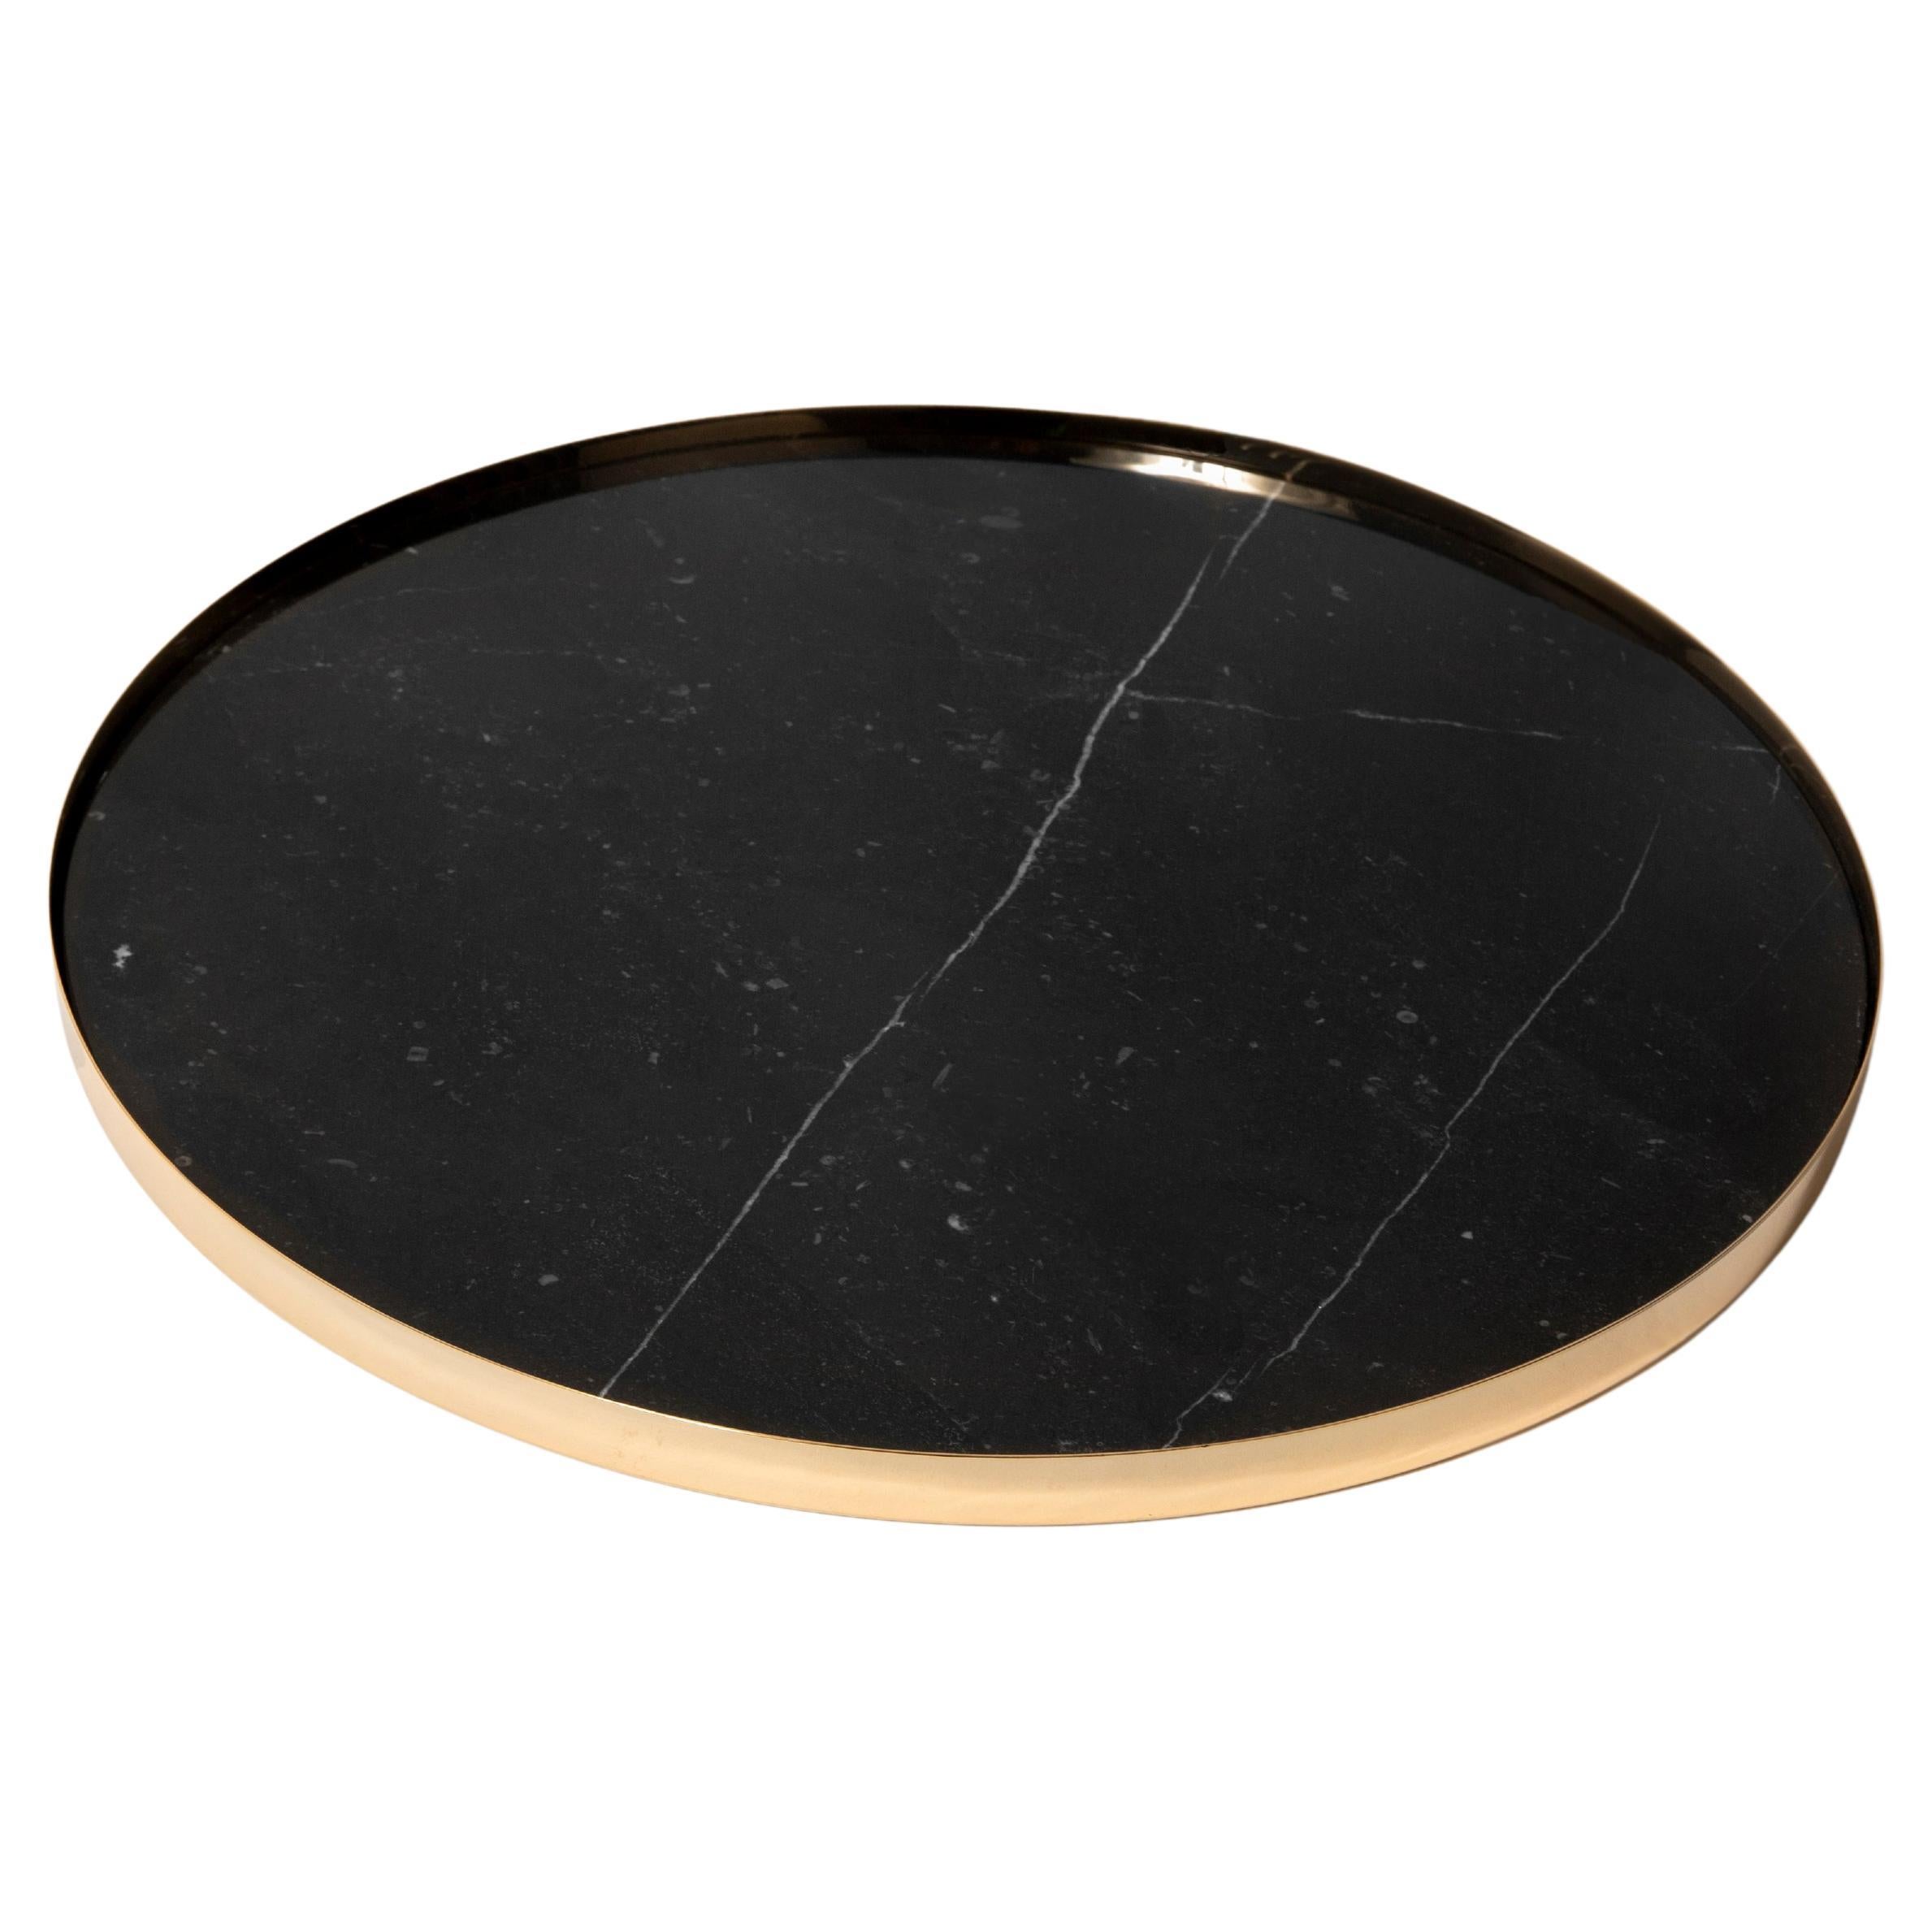 Decorative Gold Plated with Nero Marquina Tray